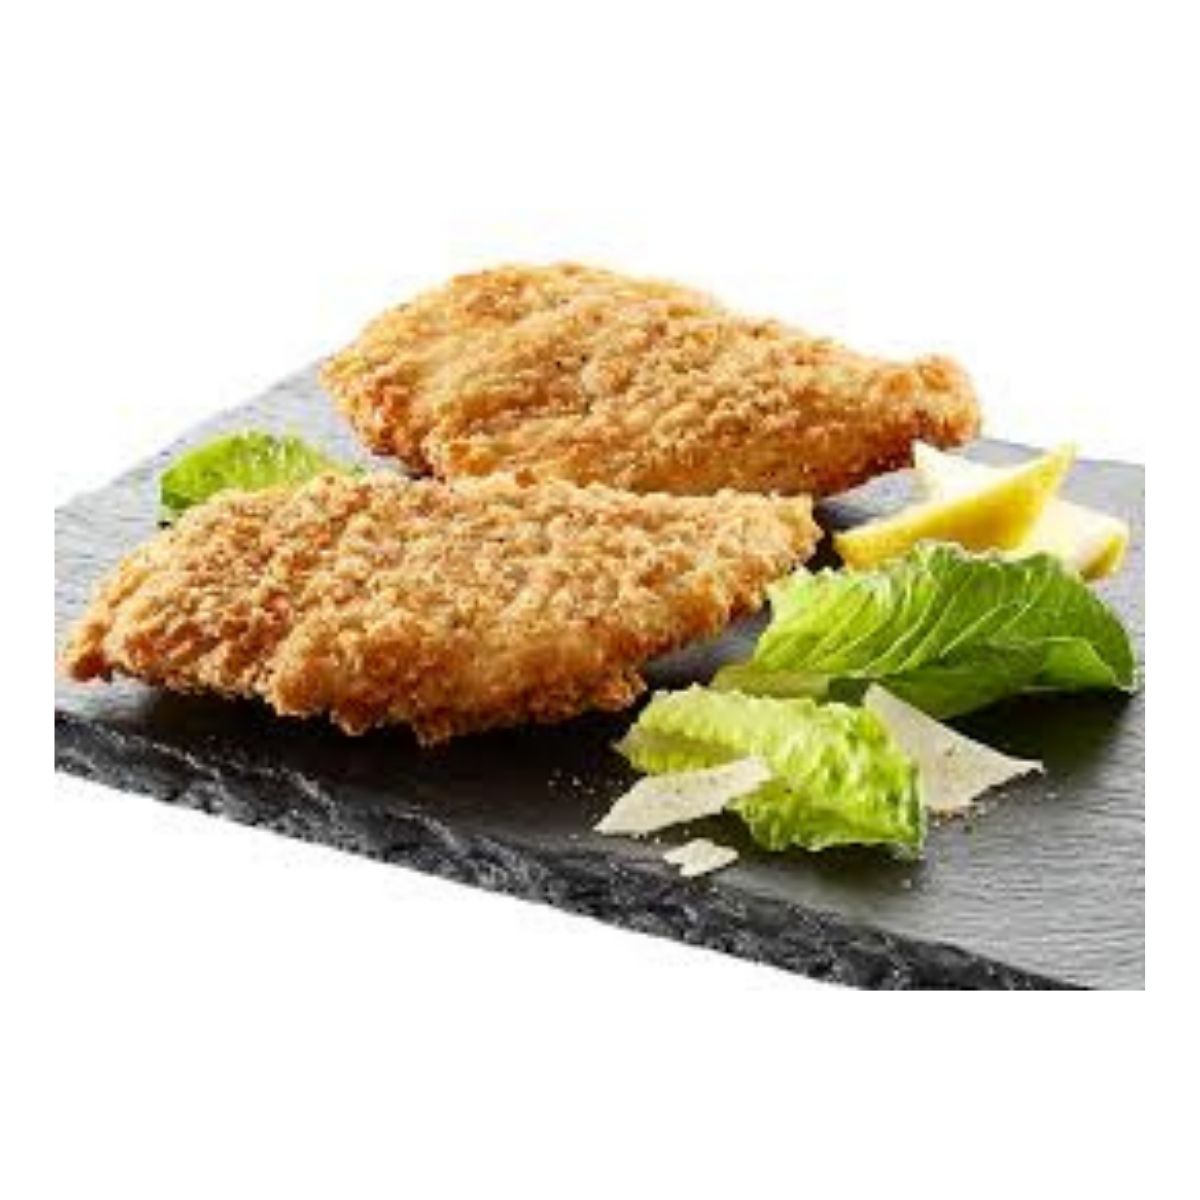 Southern Fried Chicken Fillets x 8 - CMKfoods